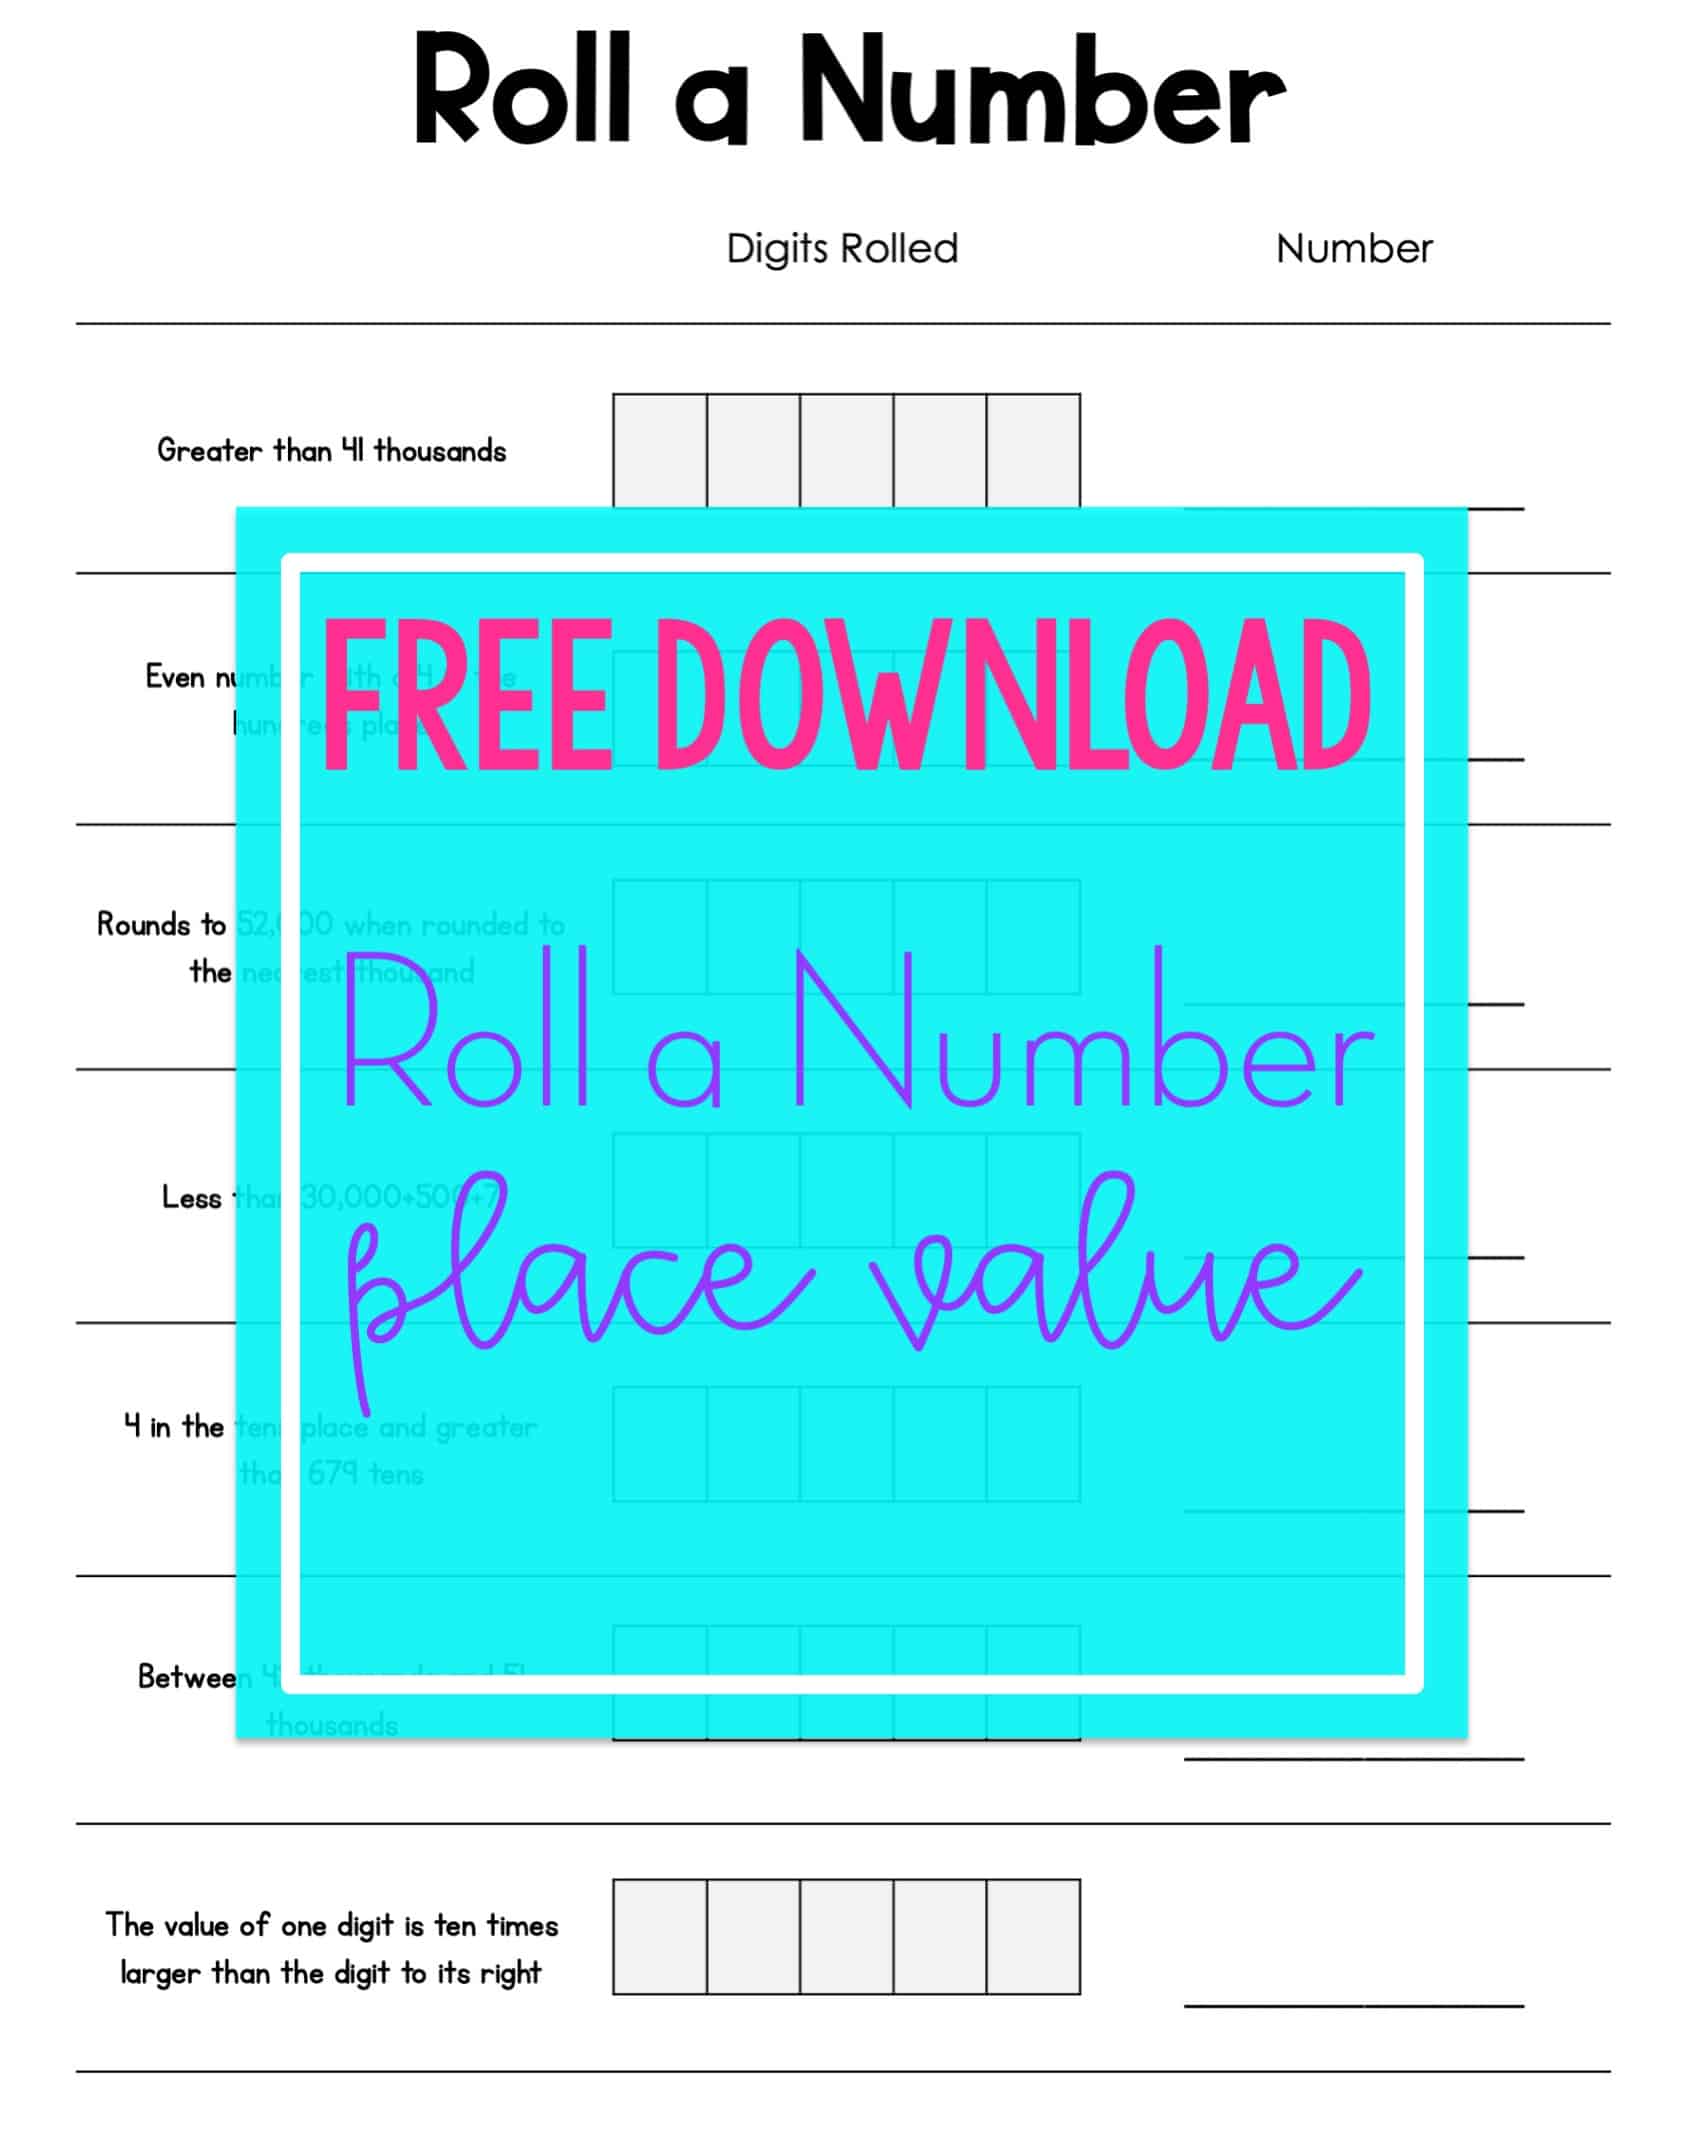 Free Download: Roll a Number